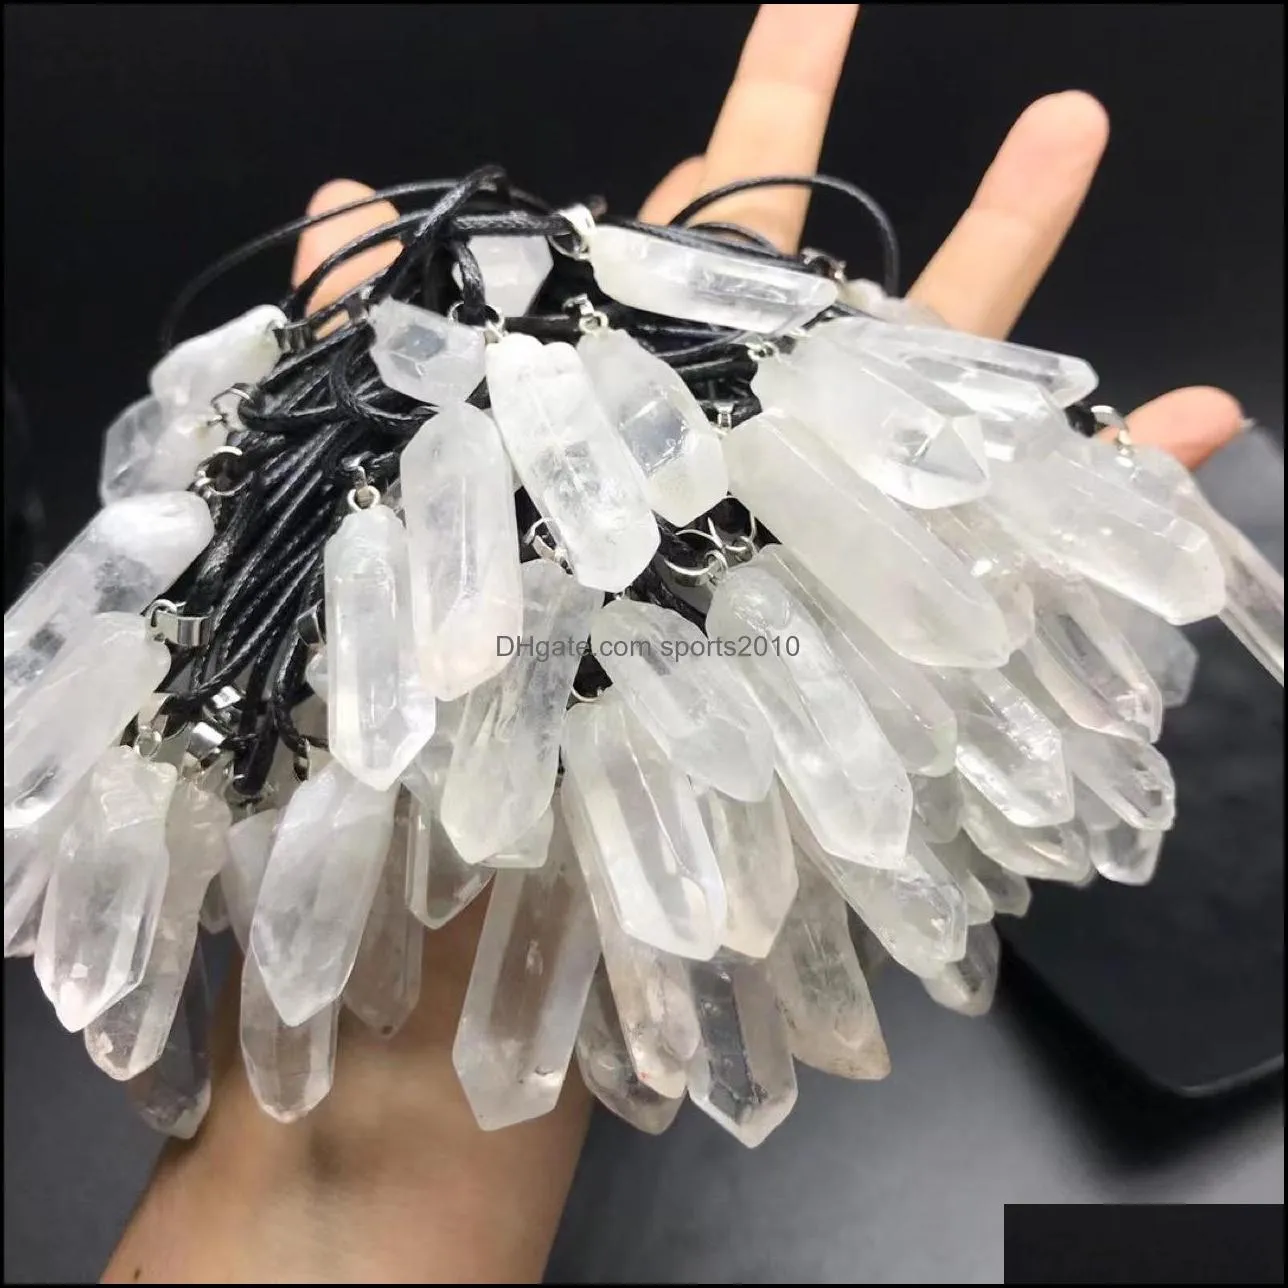 trendy natural white crystal pillar energy healing stone pendant necklace rope necklace women jewelry factory wholesal sports2010